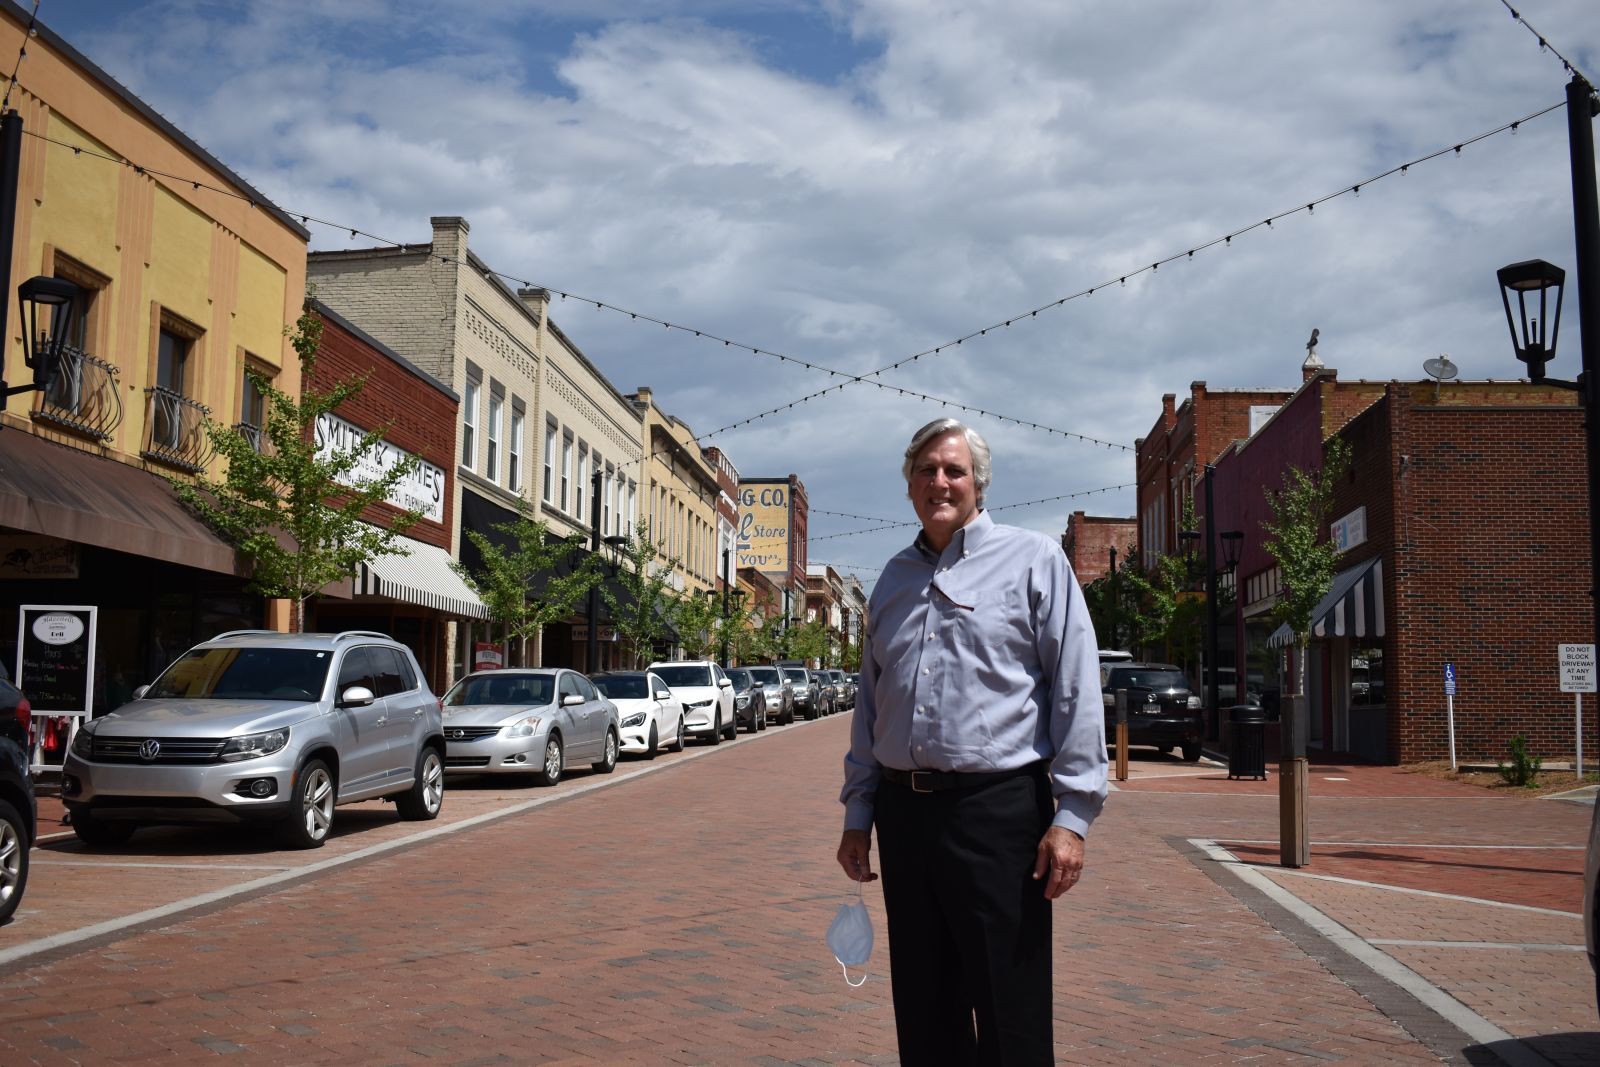 Mayor Rick Danner stands in front of CenterG's Trade Street improvements. (Photo/Molly Hulsey)